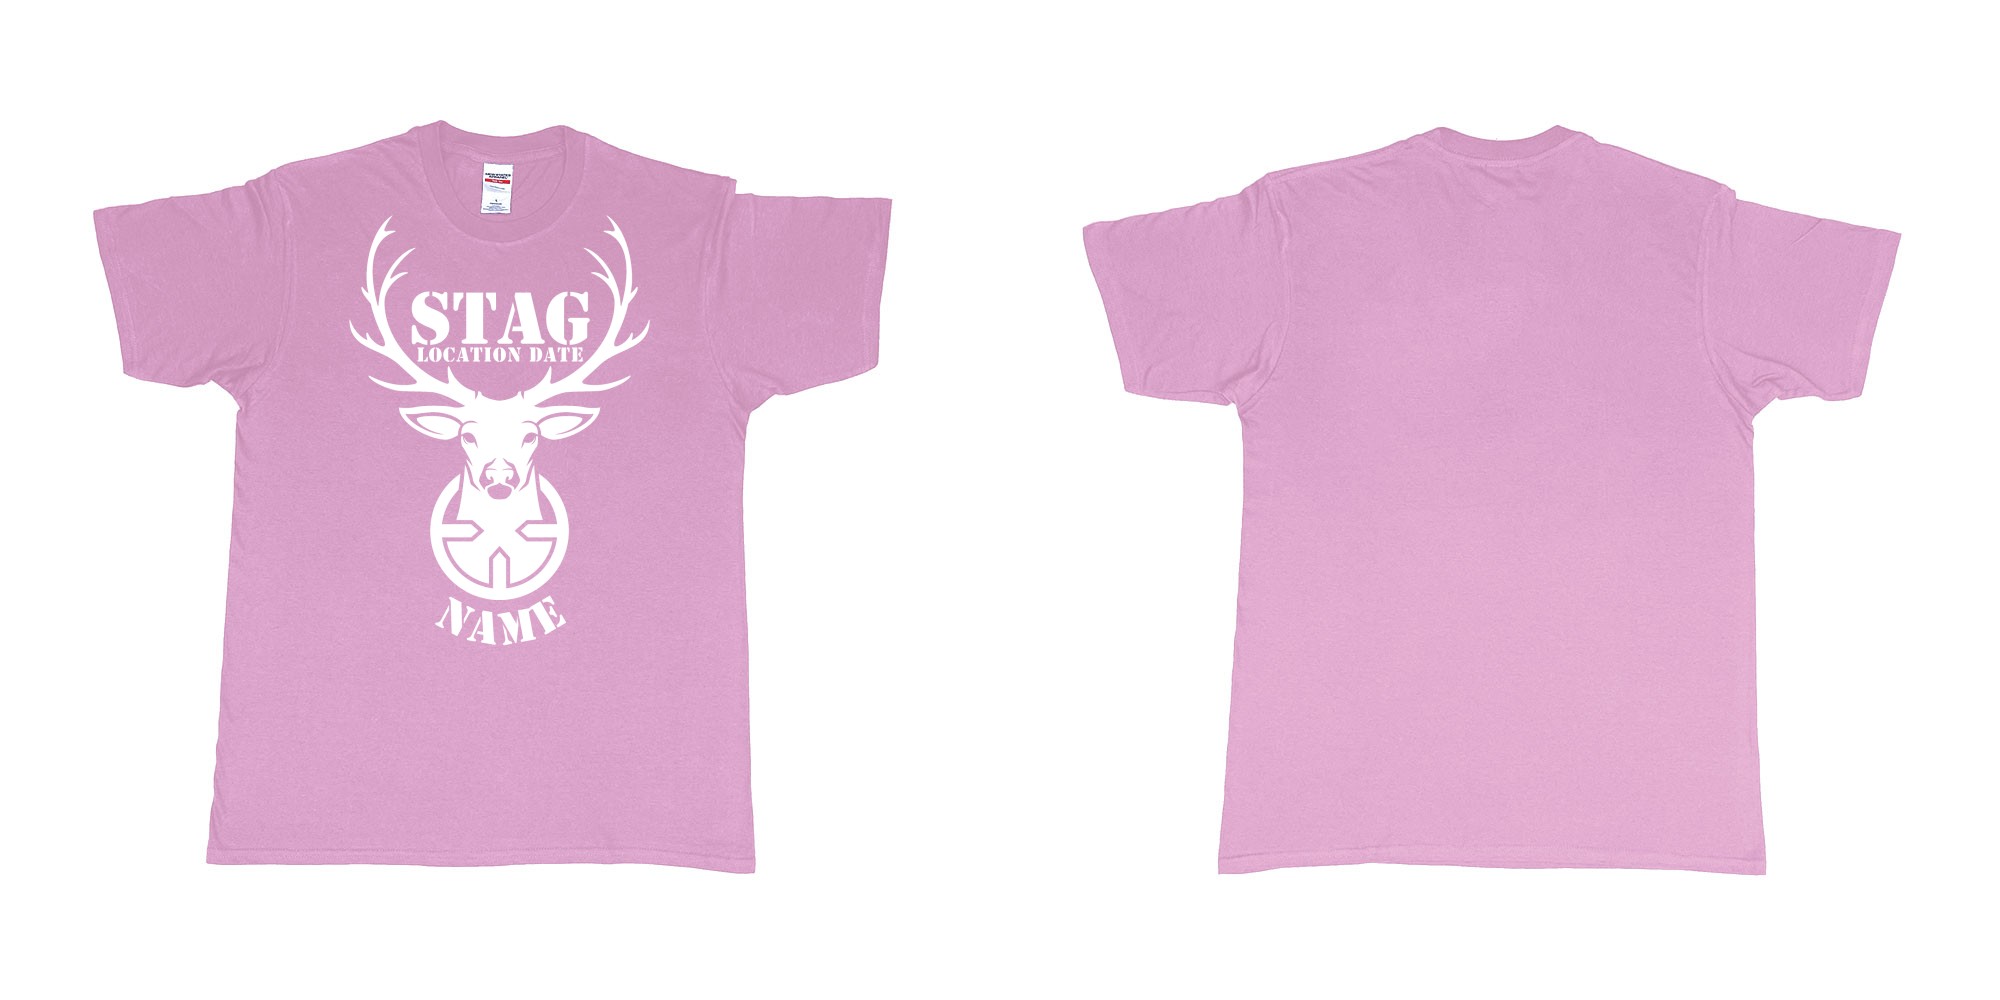 Custom tshirt design aiming for a stag custom tshirt print in fabric color light-pink choice your own text made in Bali by The Pirate Way